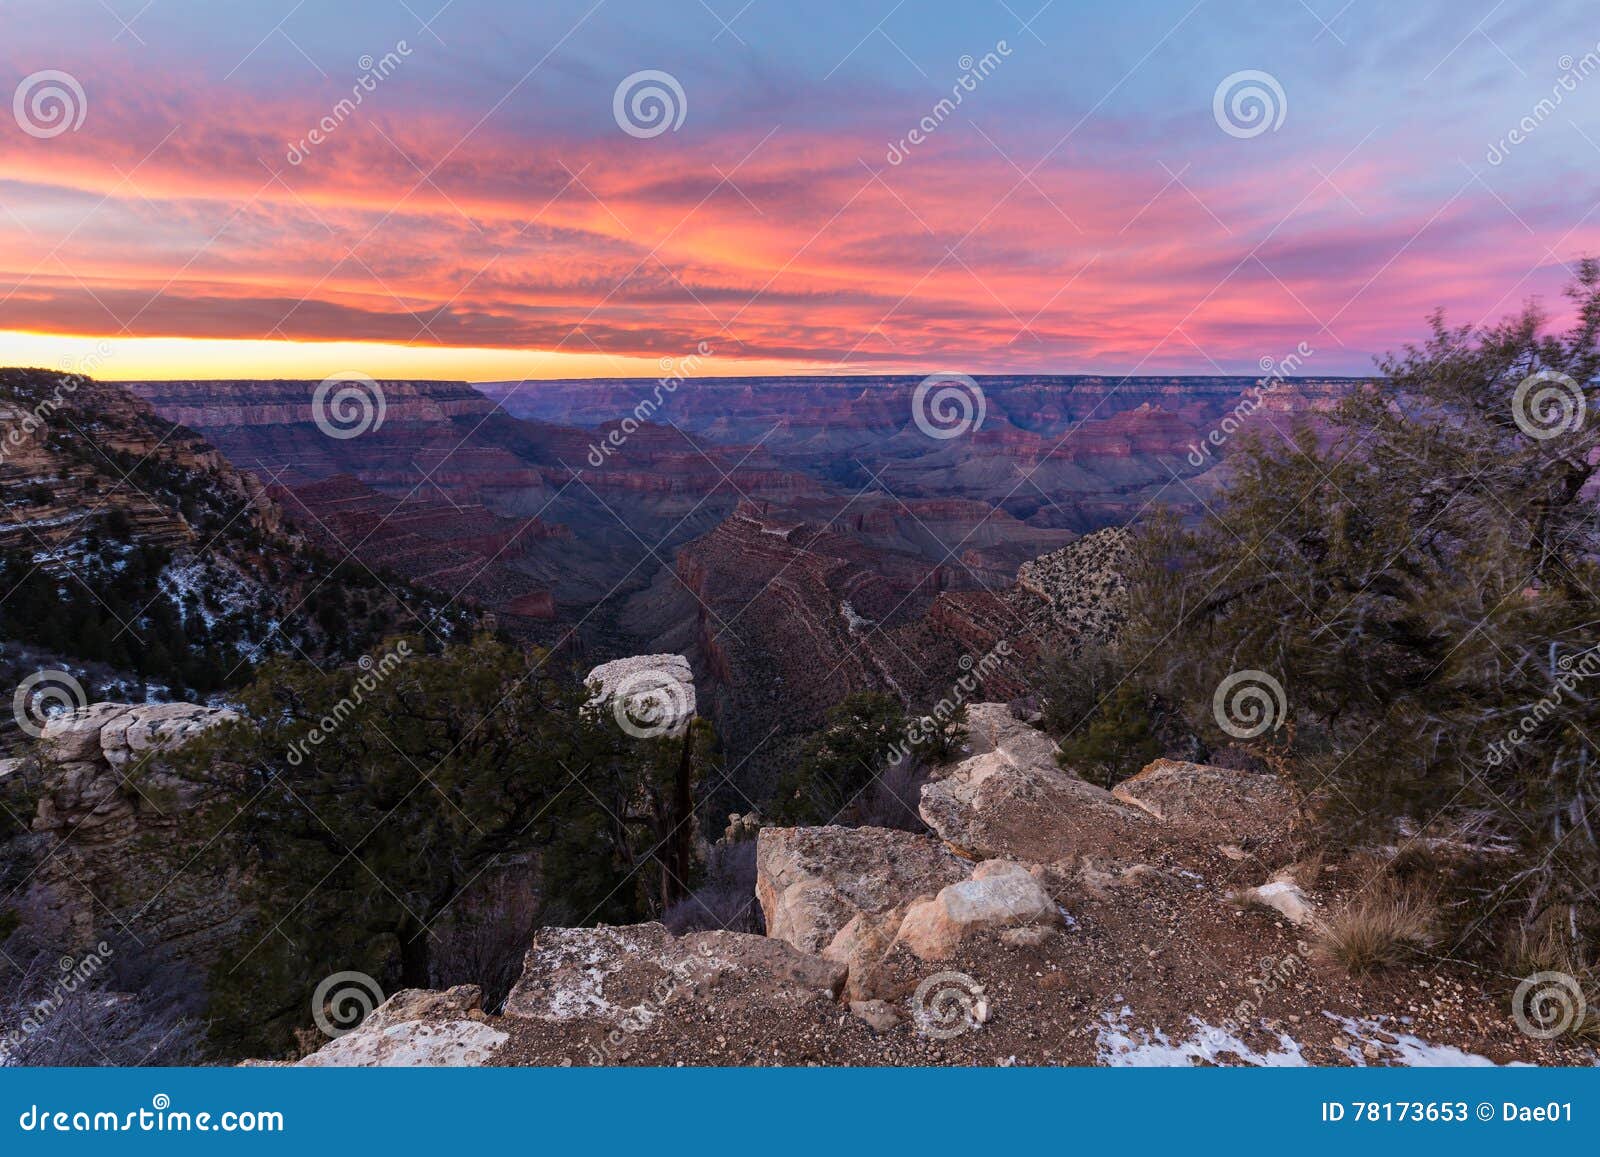 Beautiful Landscape Of Grand Canyon At Susnset Stock Image Image Of